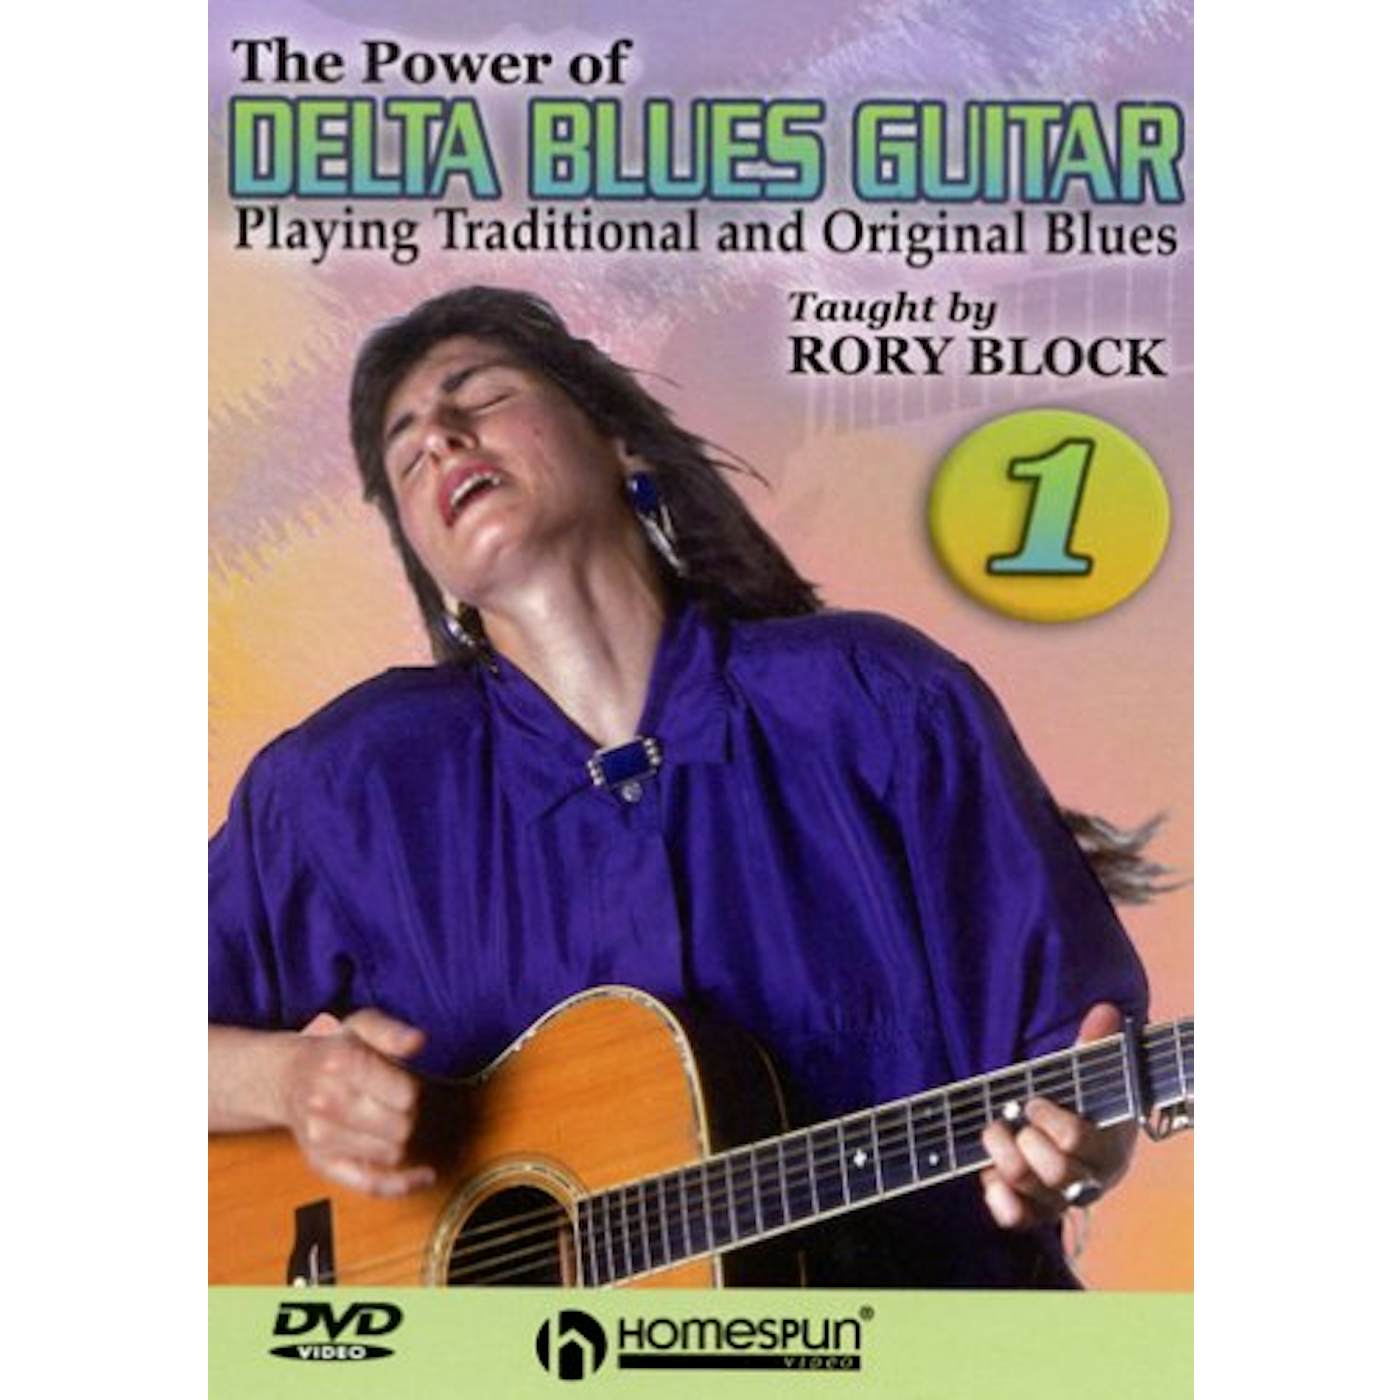 Rory Block POWER OF DELTA BLUES GUITAR 1 DVD